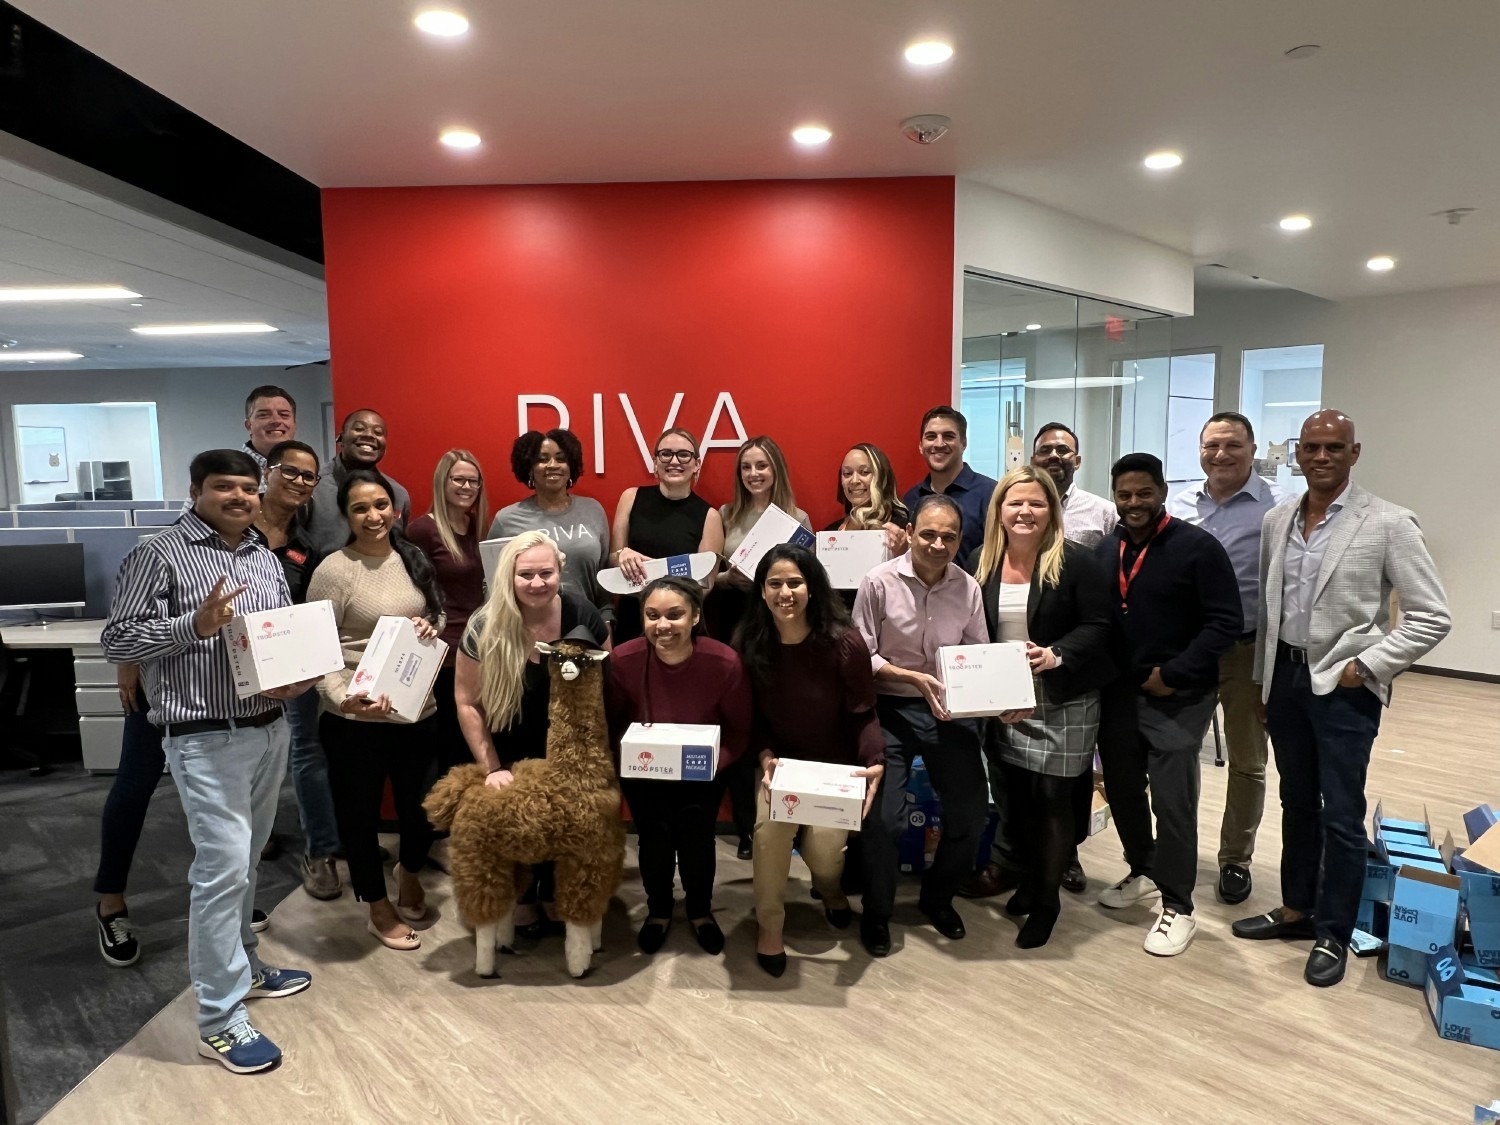 Team RIVA is proud to support our military community! Packing 200 boxes for active-duty military members serving abroad.